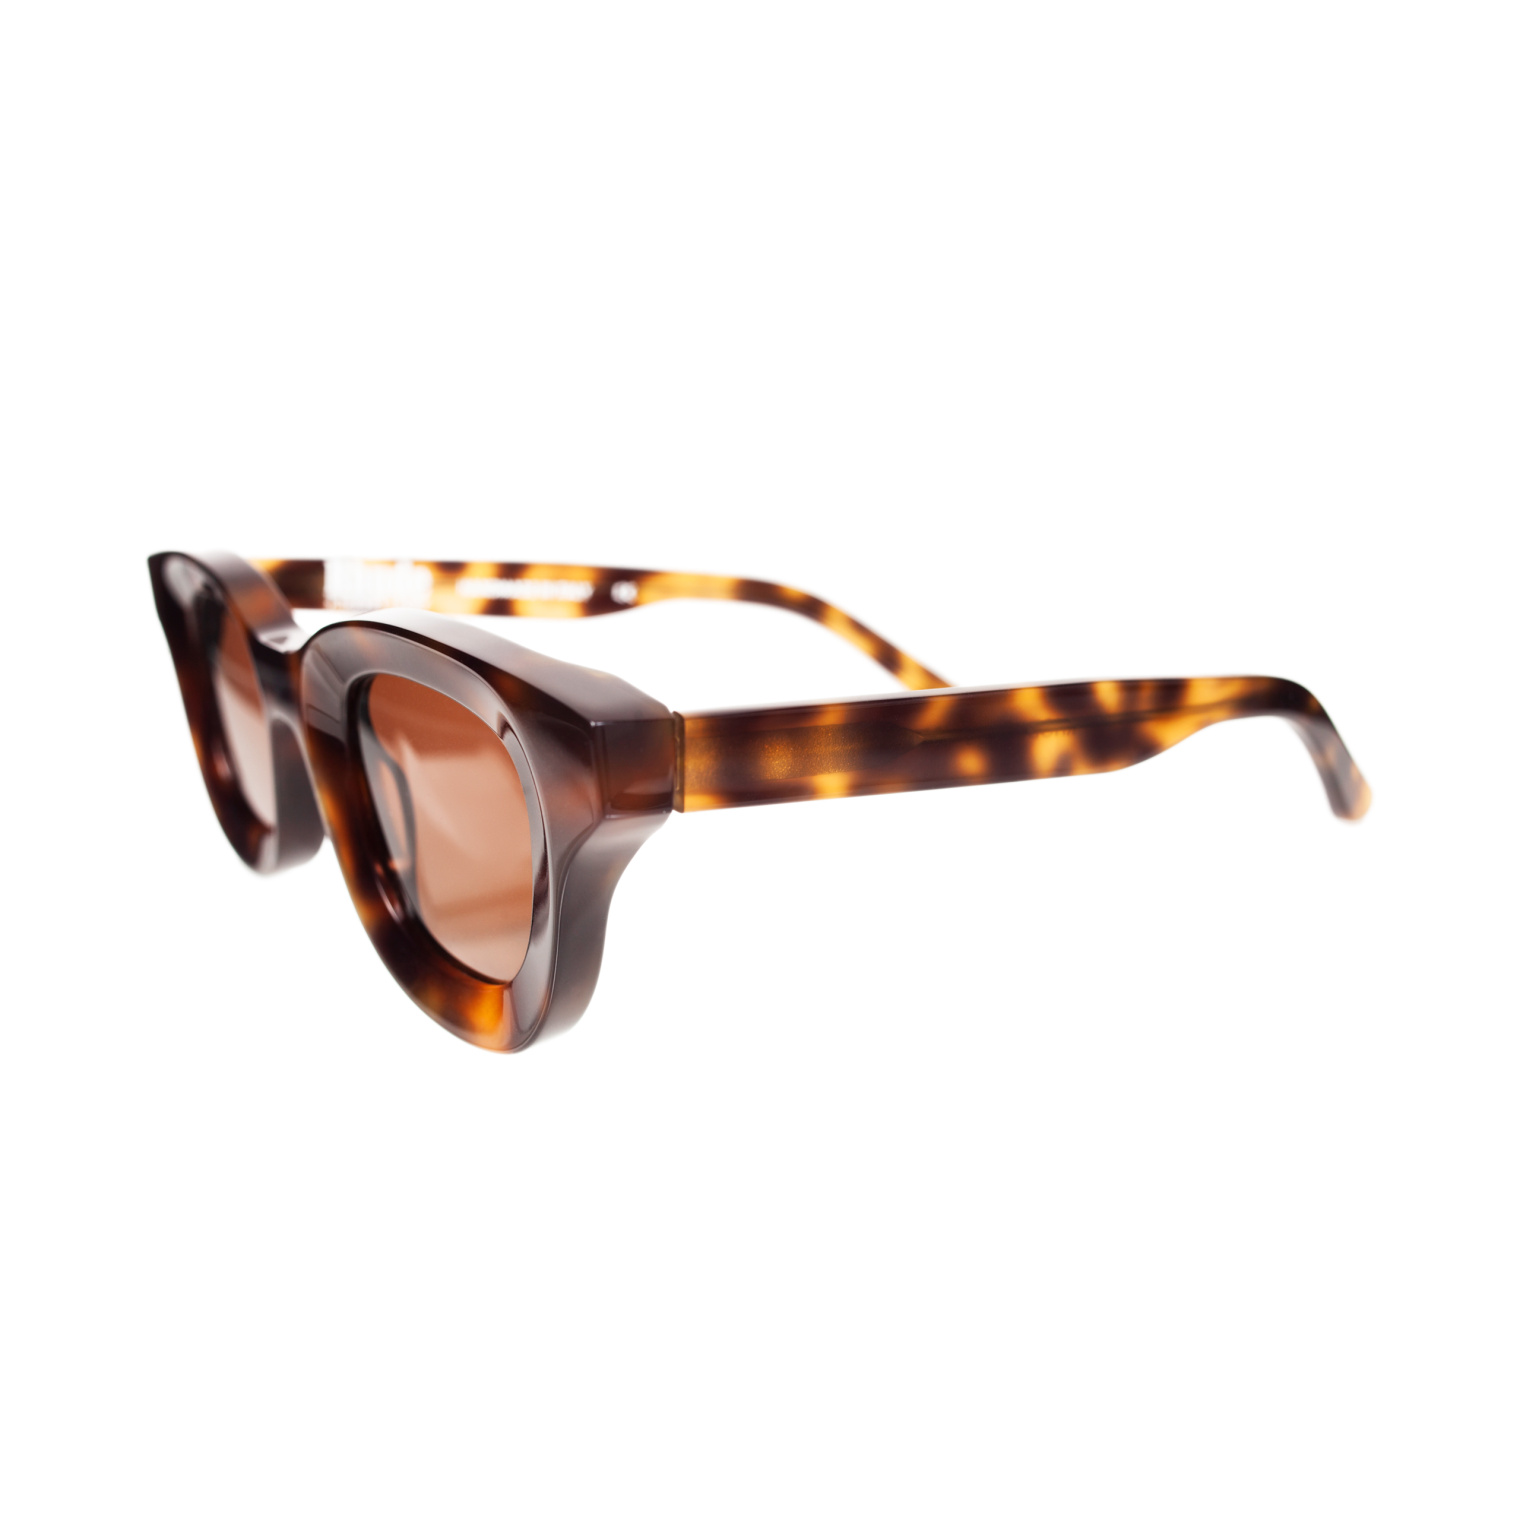 Thierry Lasry Солнцезащитные очки Rhude x Thierry Lasry Phodeo